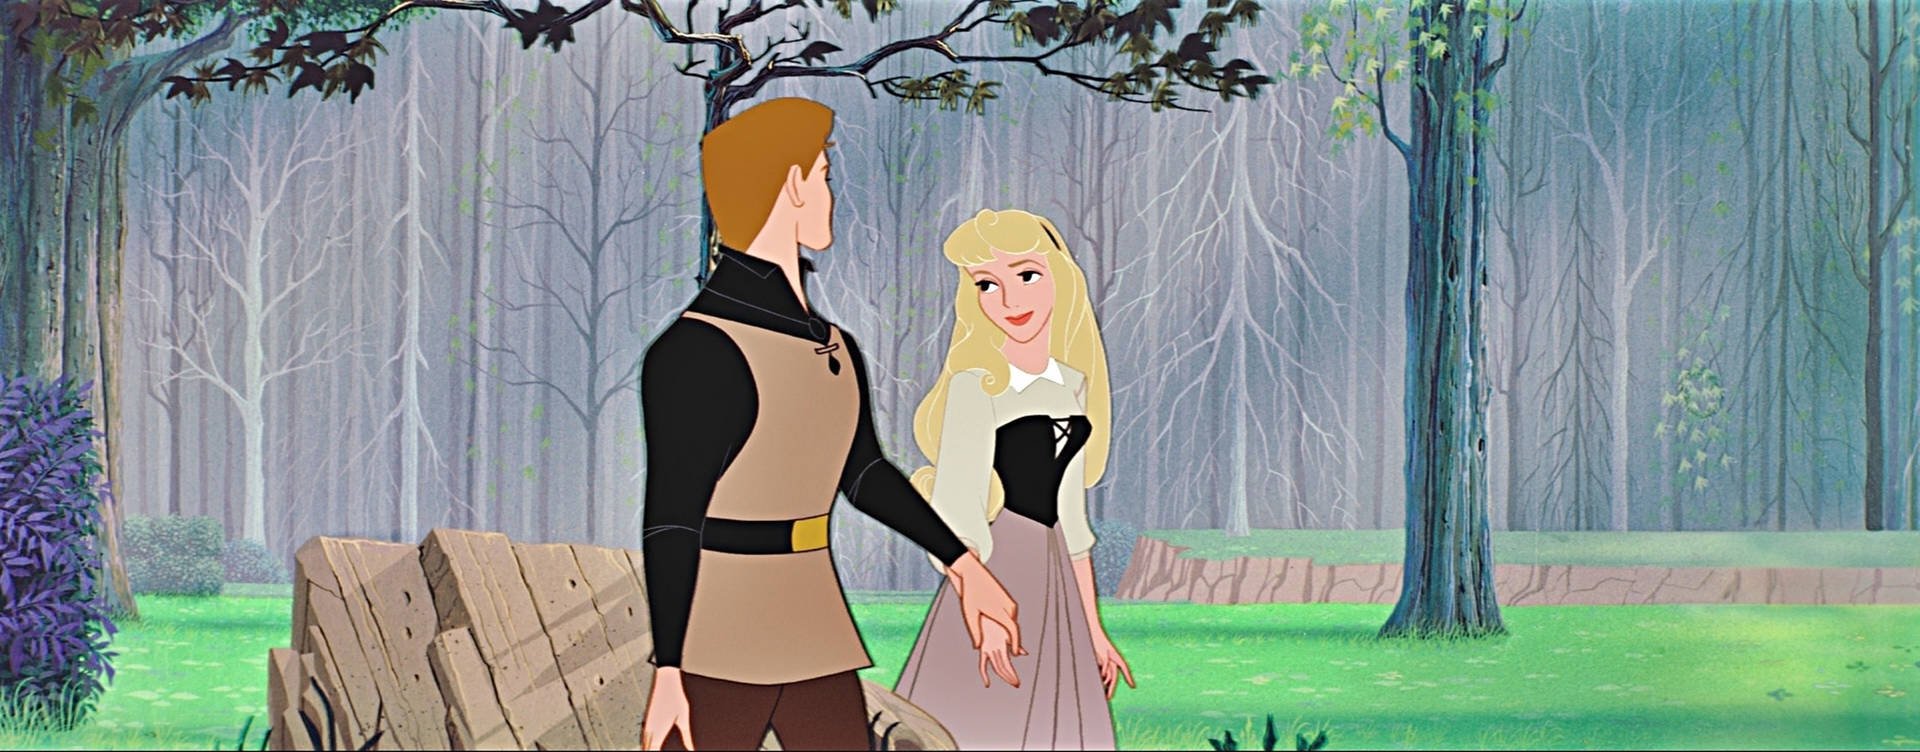 Disney Princess And Prince In Forest